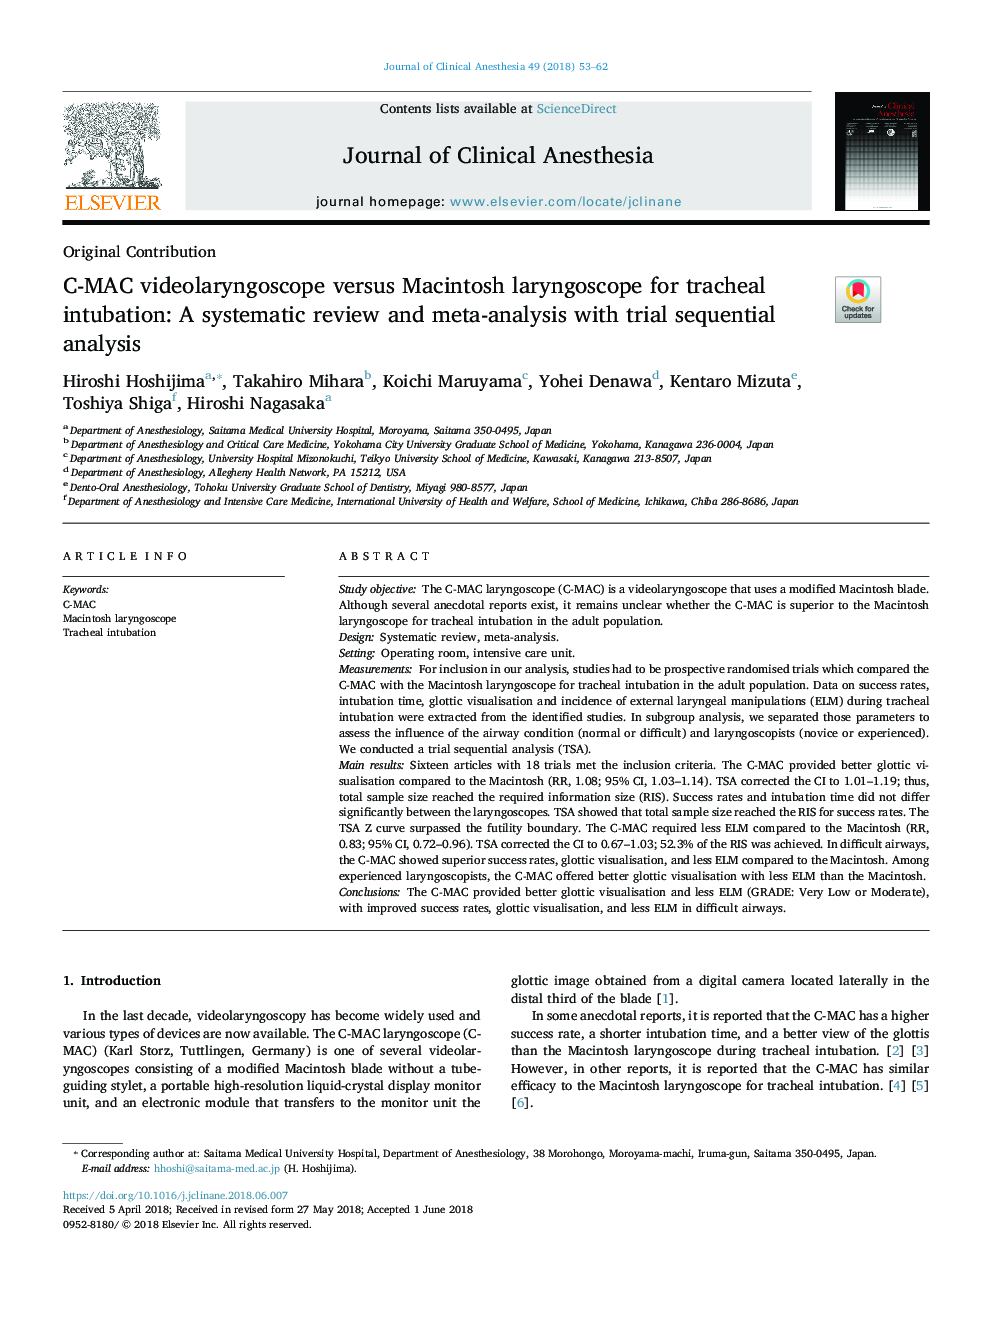 C-MAC videolaryngoscope versus Macintosh laryngoscope for tracheal intubation: A systematic review and meta-analysis with trial sequential analysis